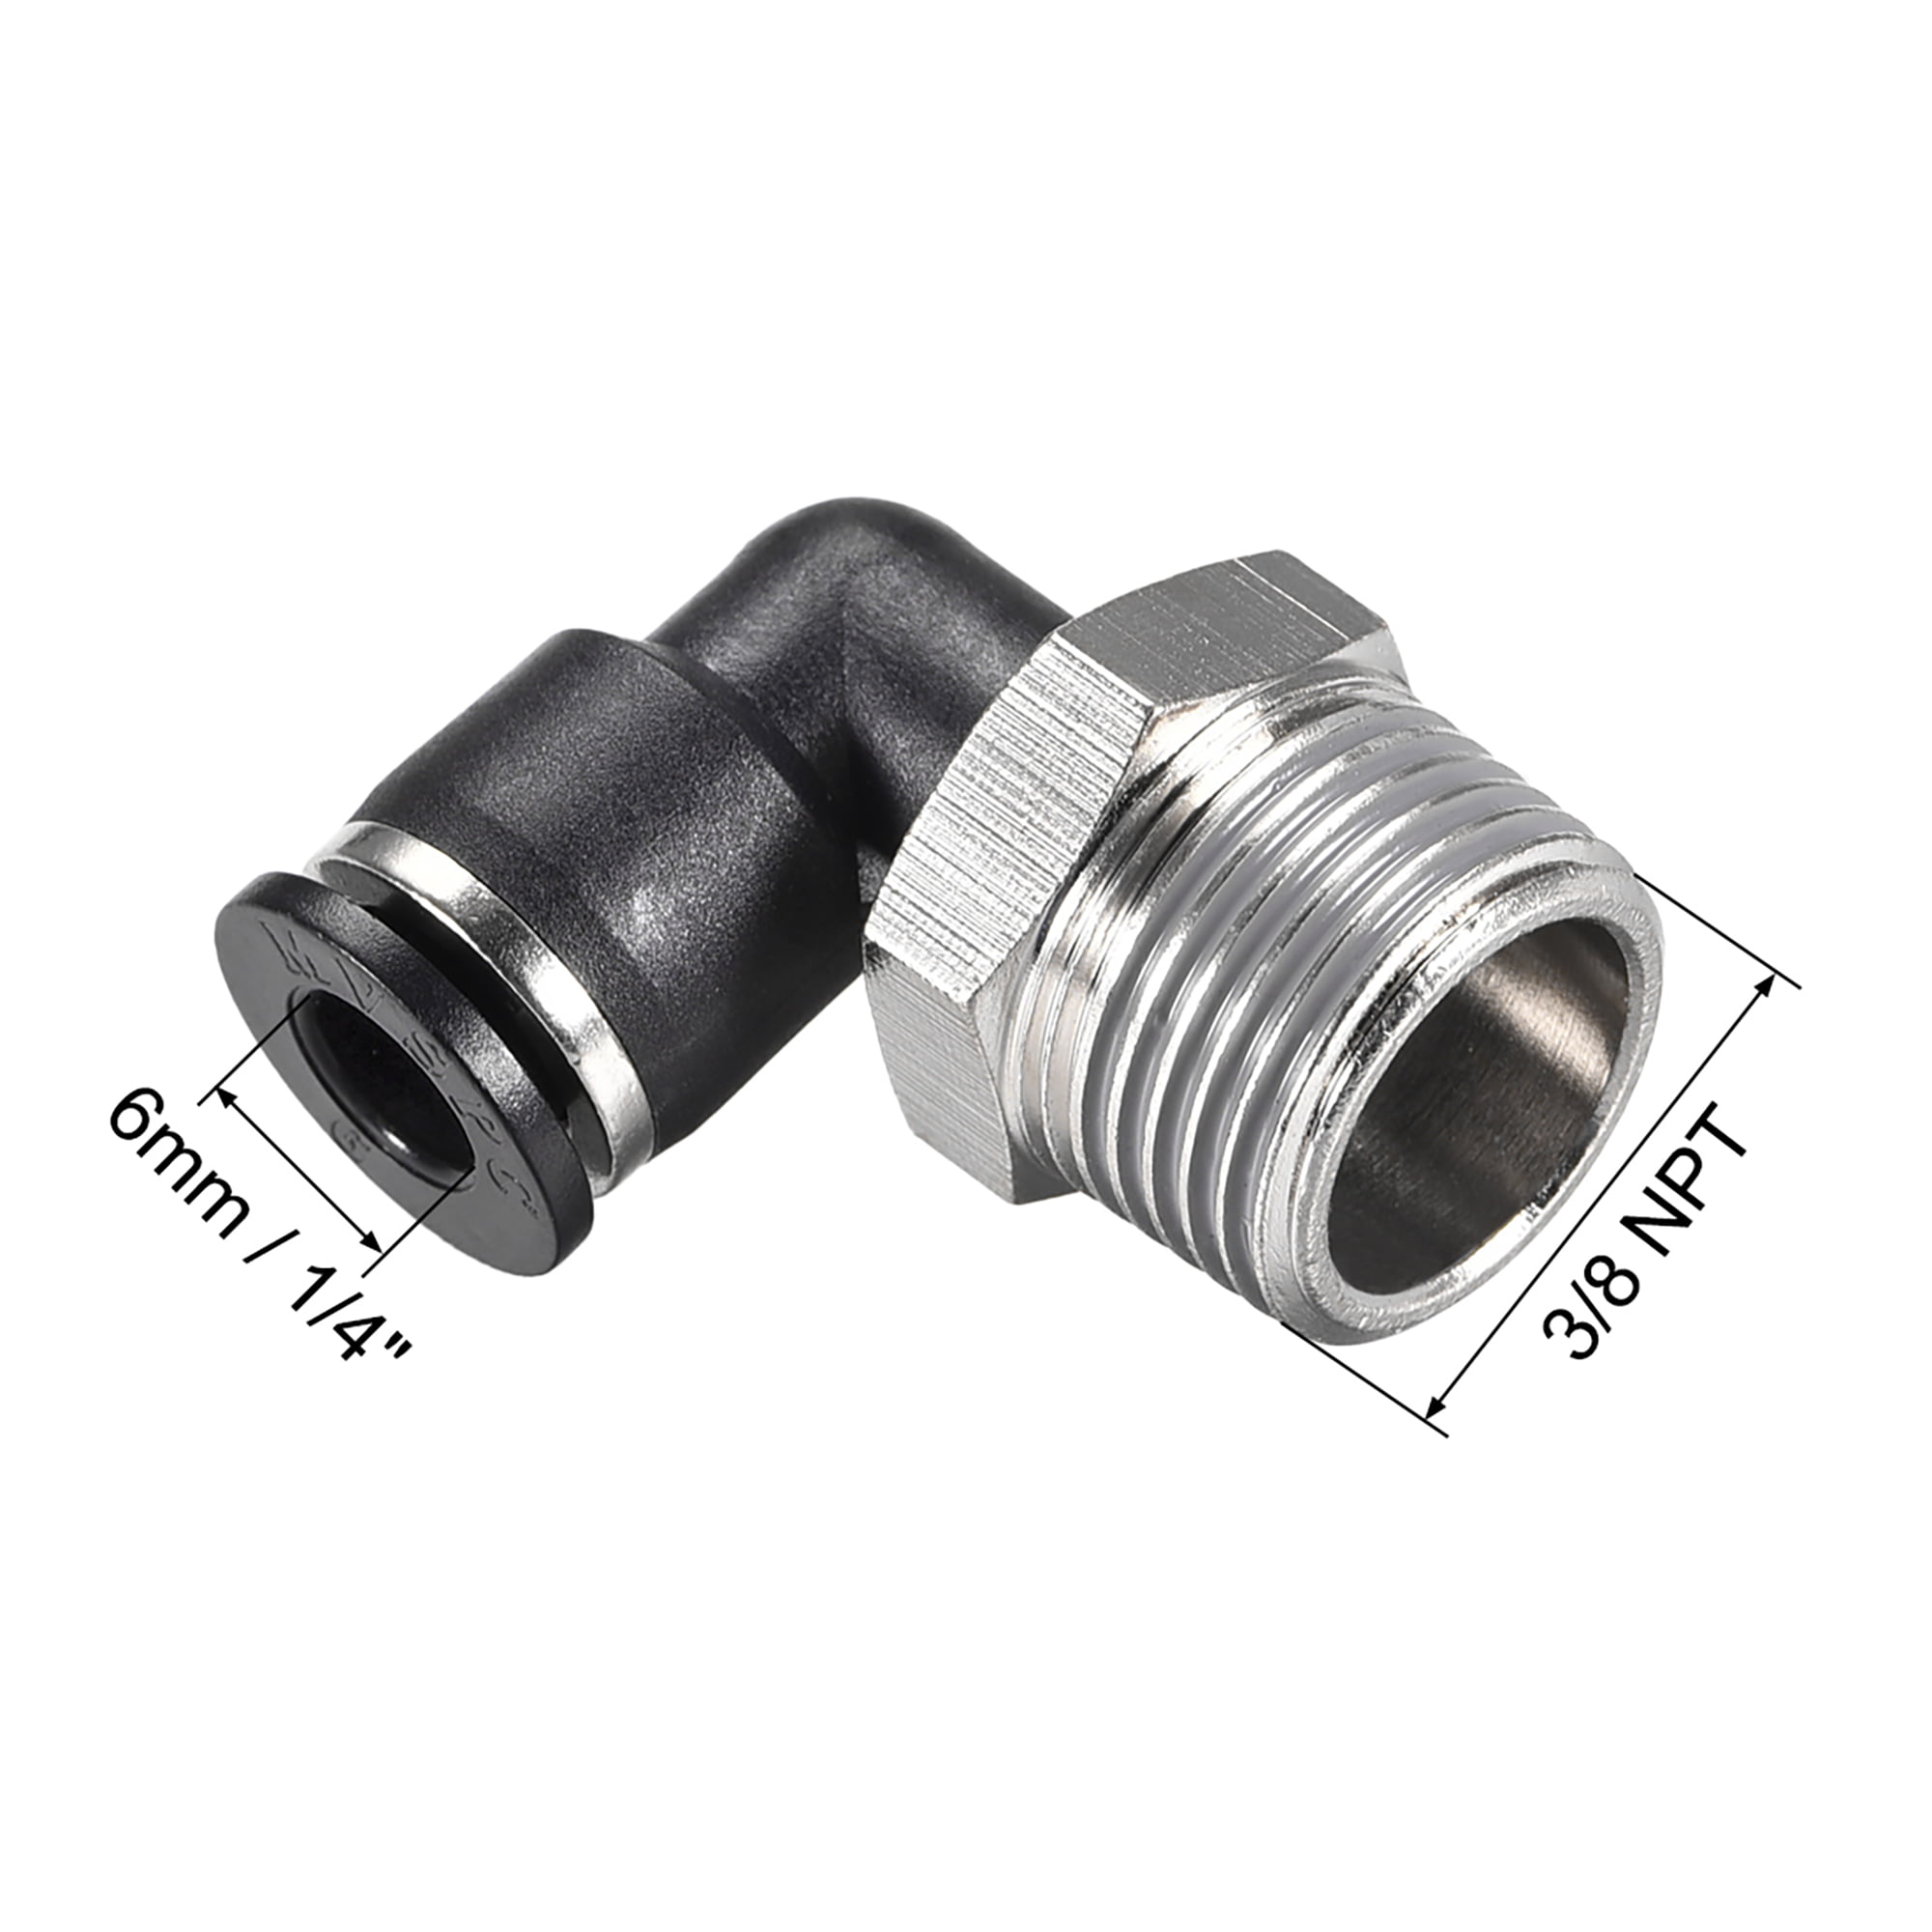 1/2" OD 1/4" NPT Male Elbow One Touch Push to Connect Air Fitting Pack of 5 